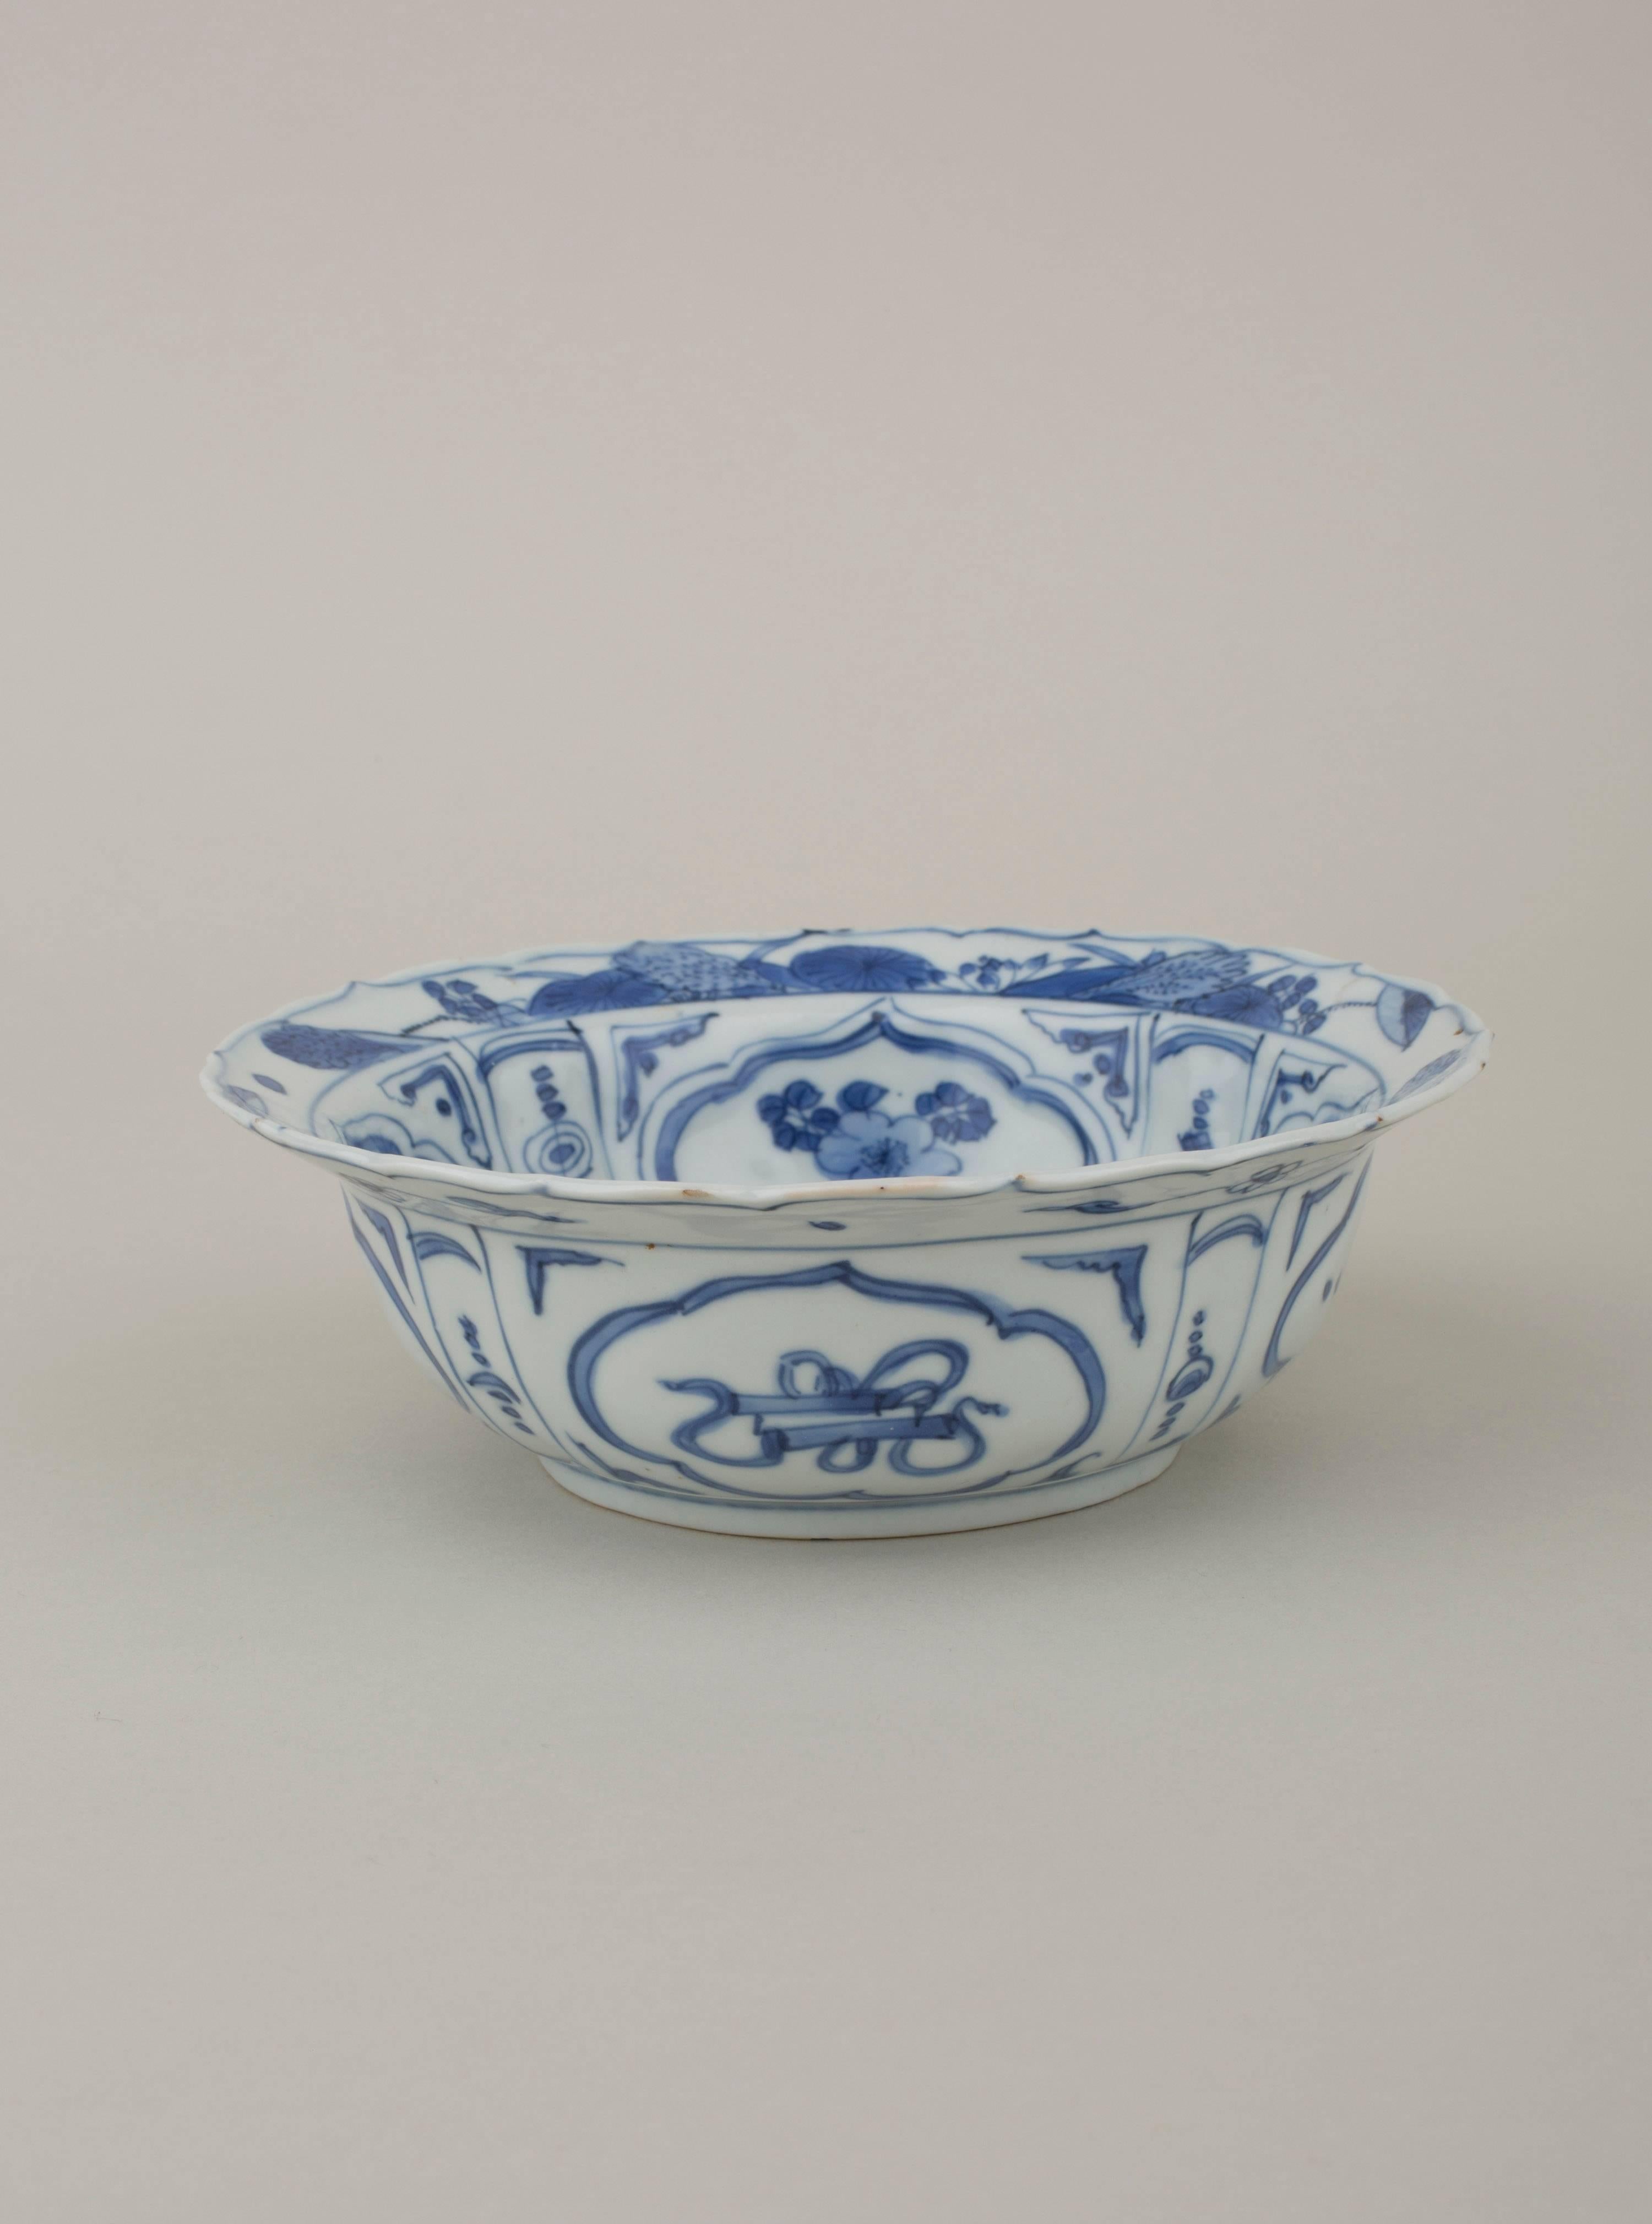 Chinese porcelain blue and white kraak klapmutz bowl with foliate everted rim, painted in the centre with a mountain landcape scene with pagodas and flags, the cavetto with with four panels of flowers, divided by flower panels, a futher continuous